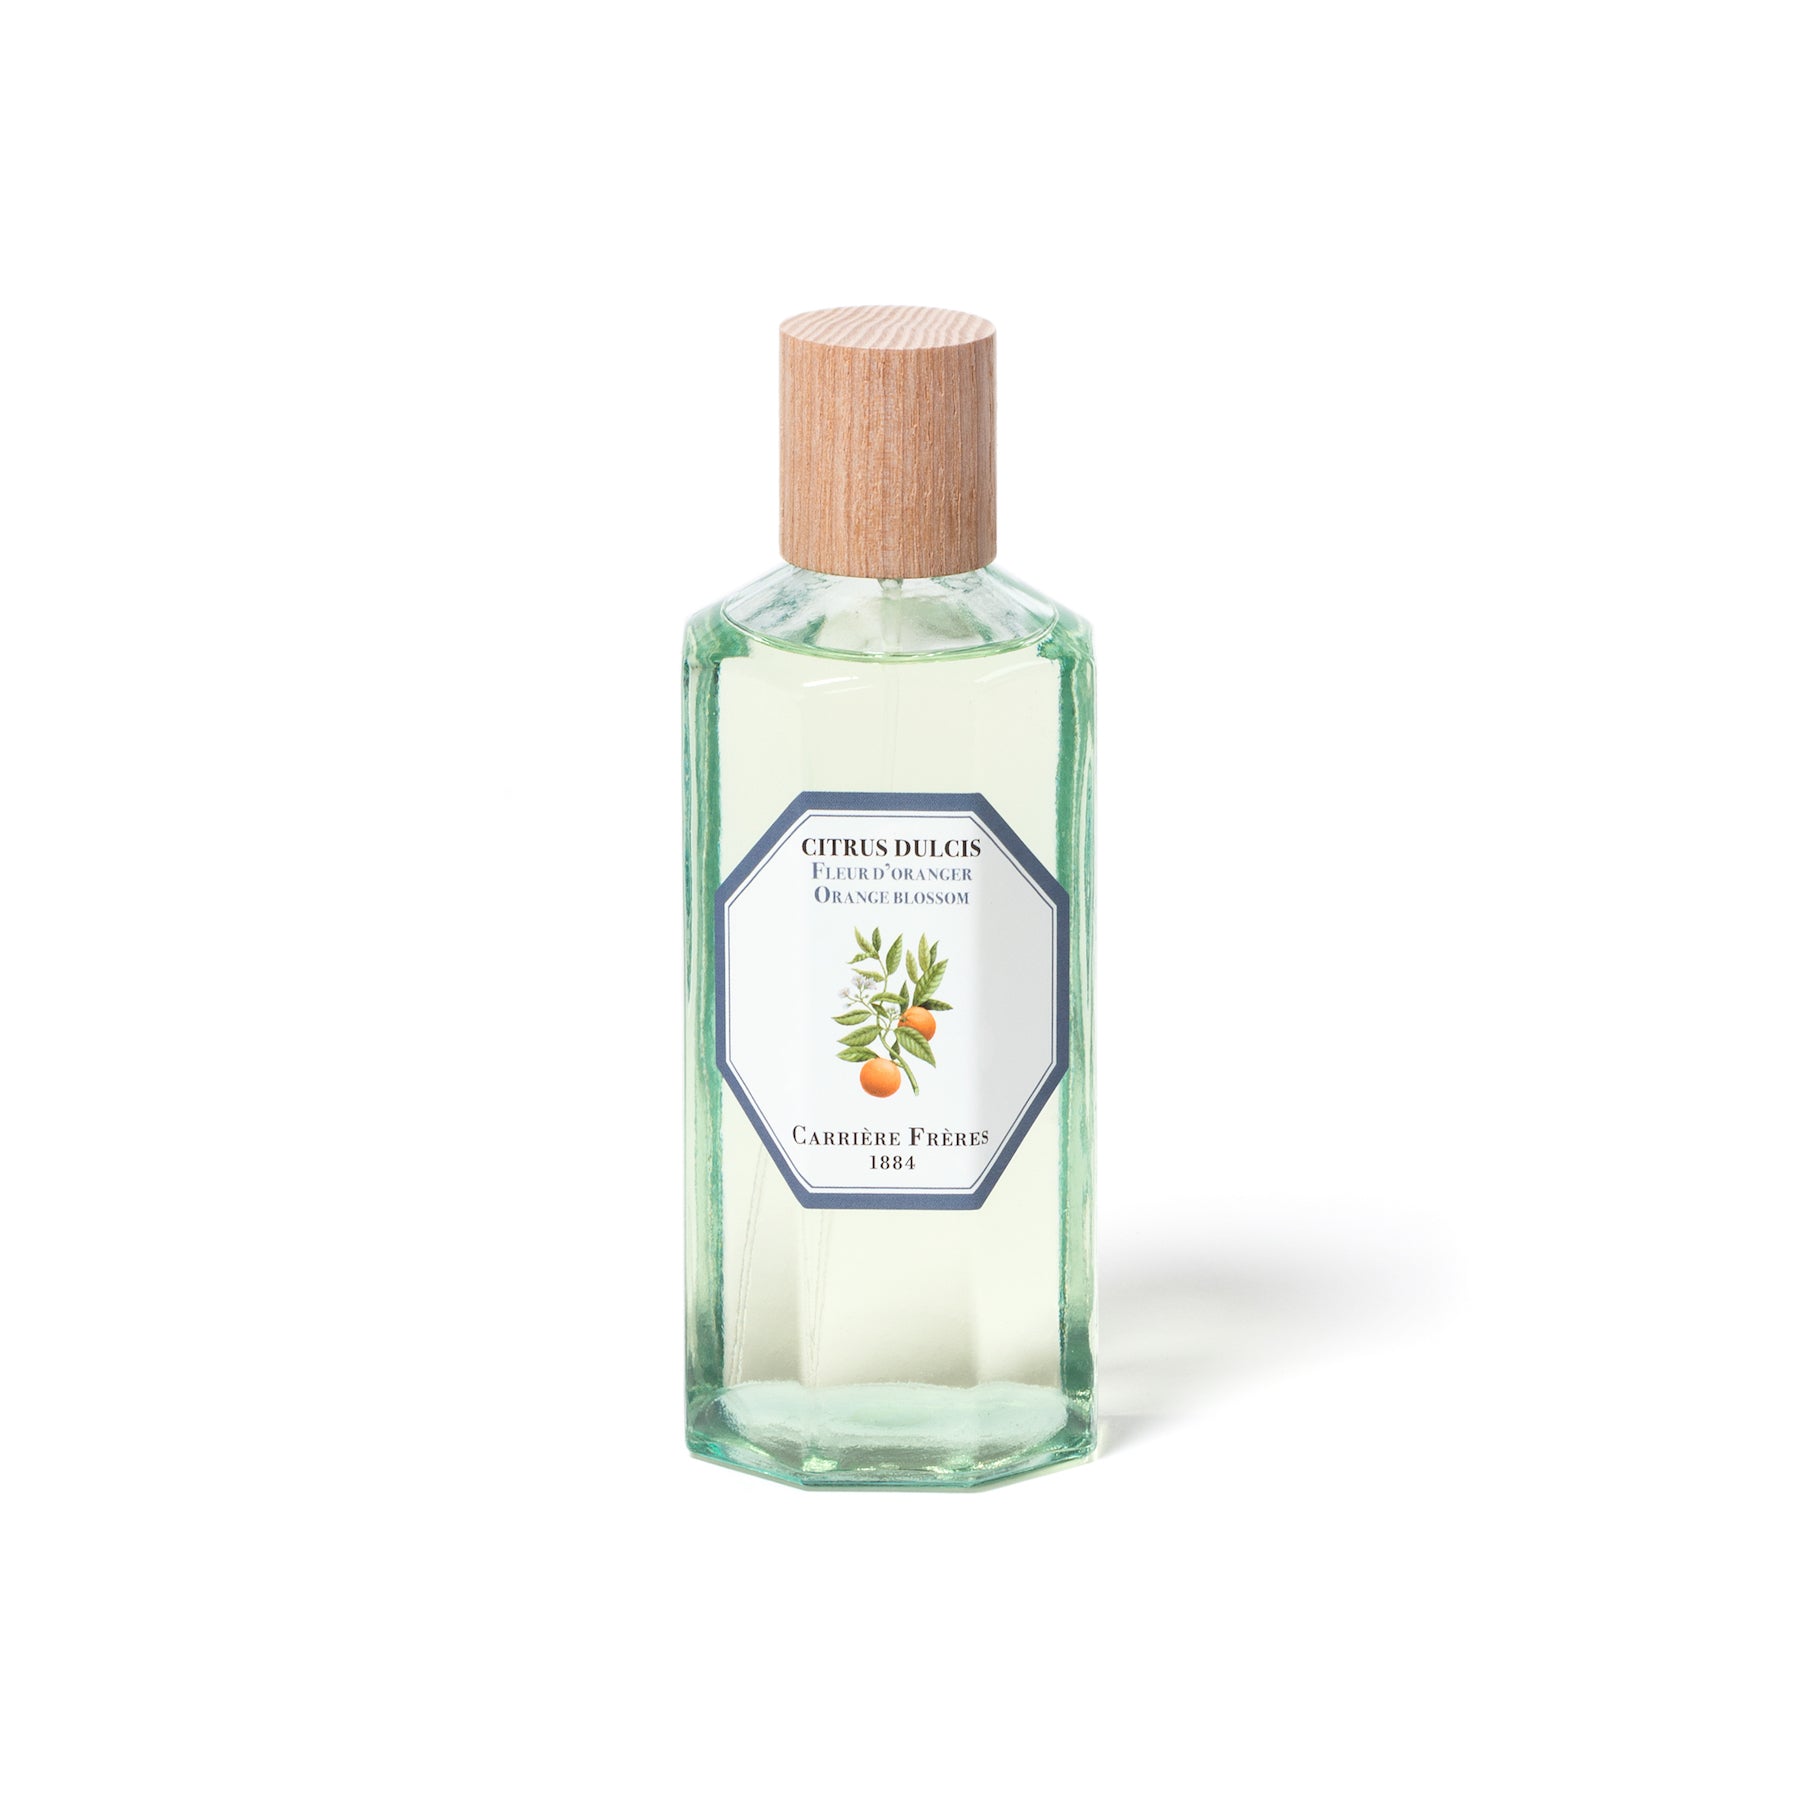 Orange Blossom Room Spray by  at The Little Dispensary Specialist Pharmacy